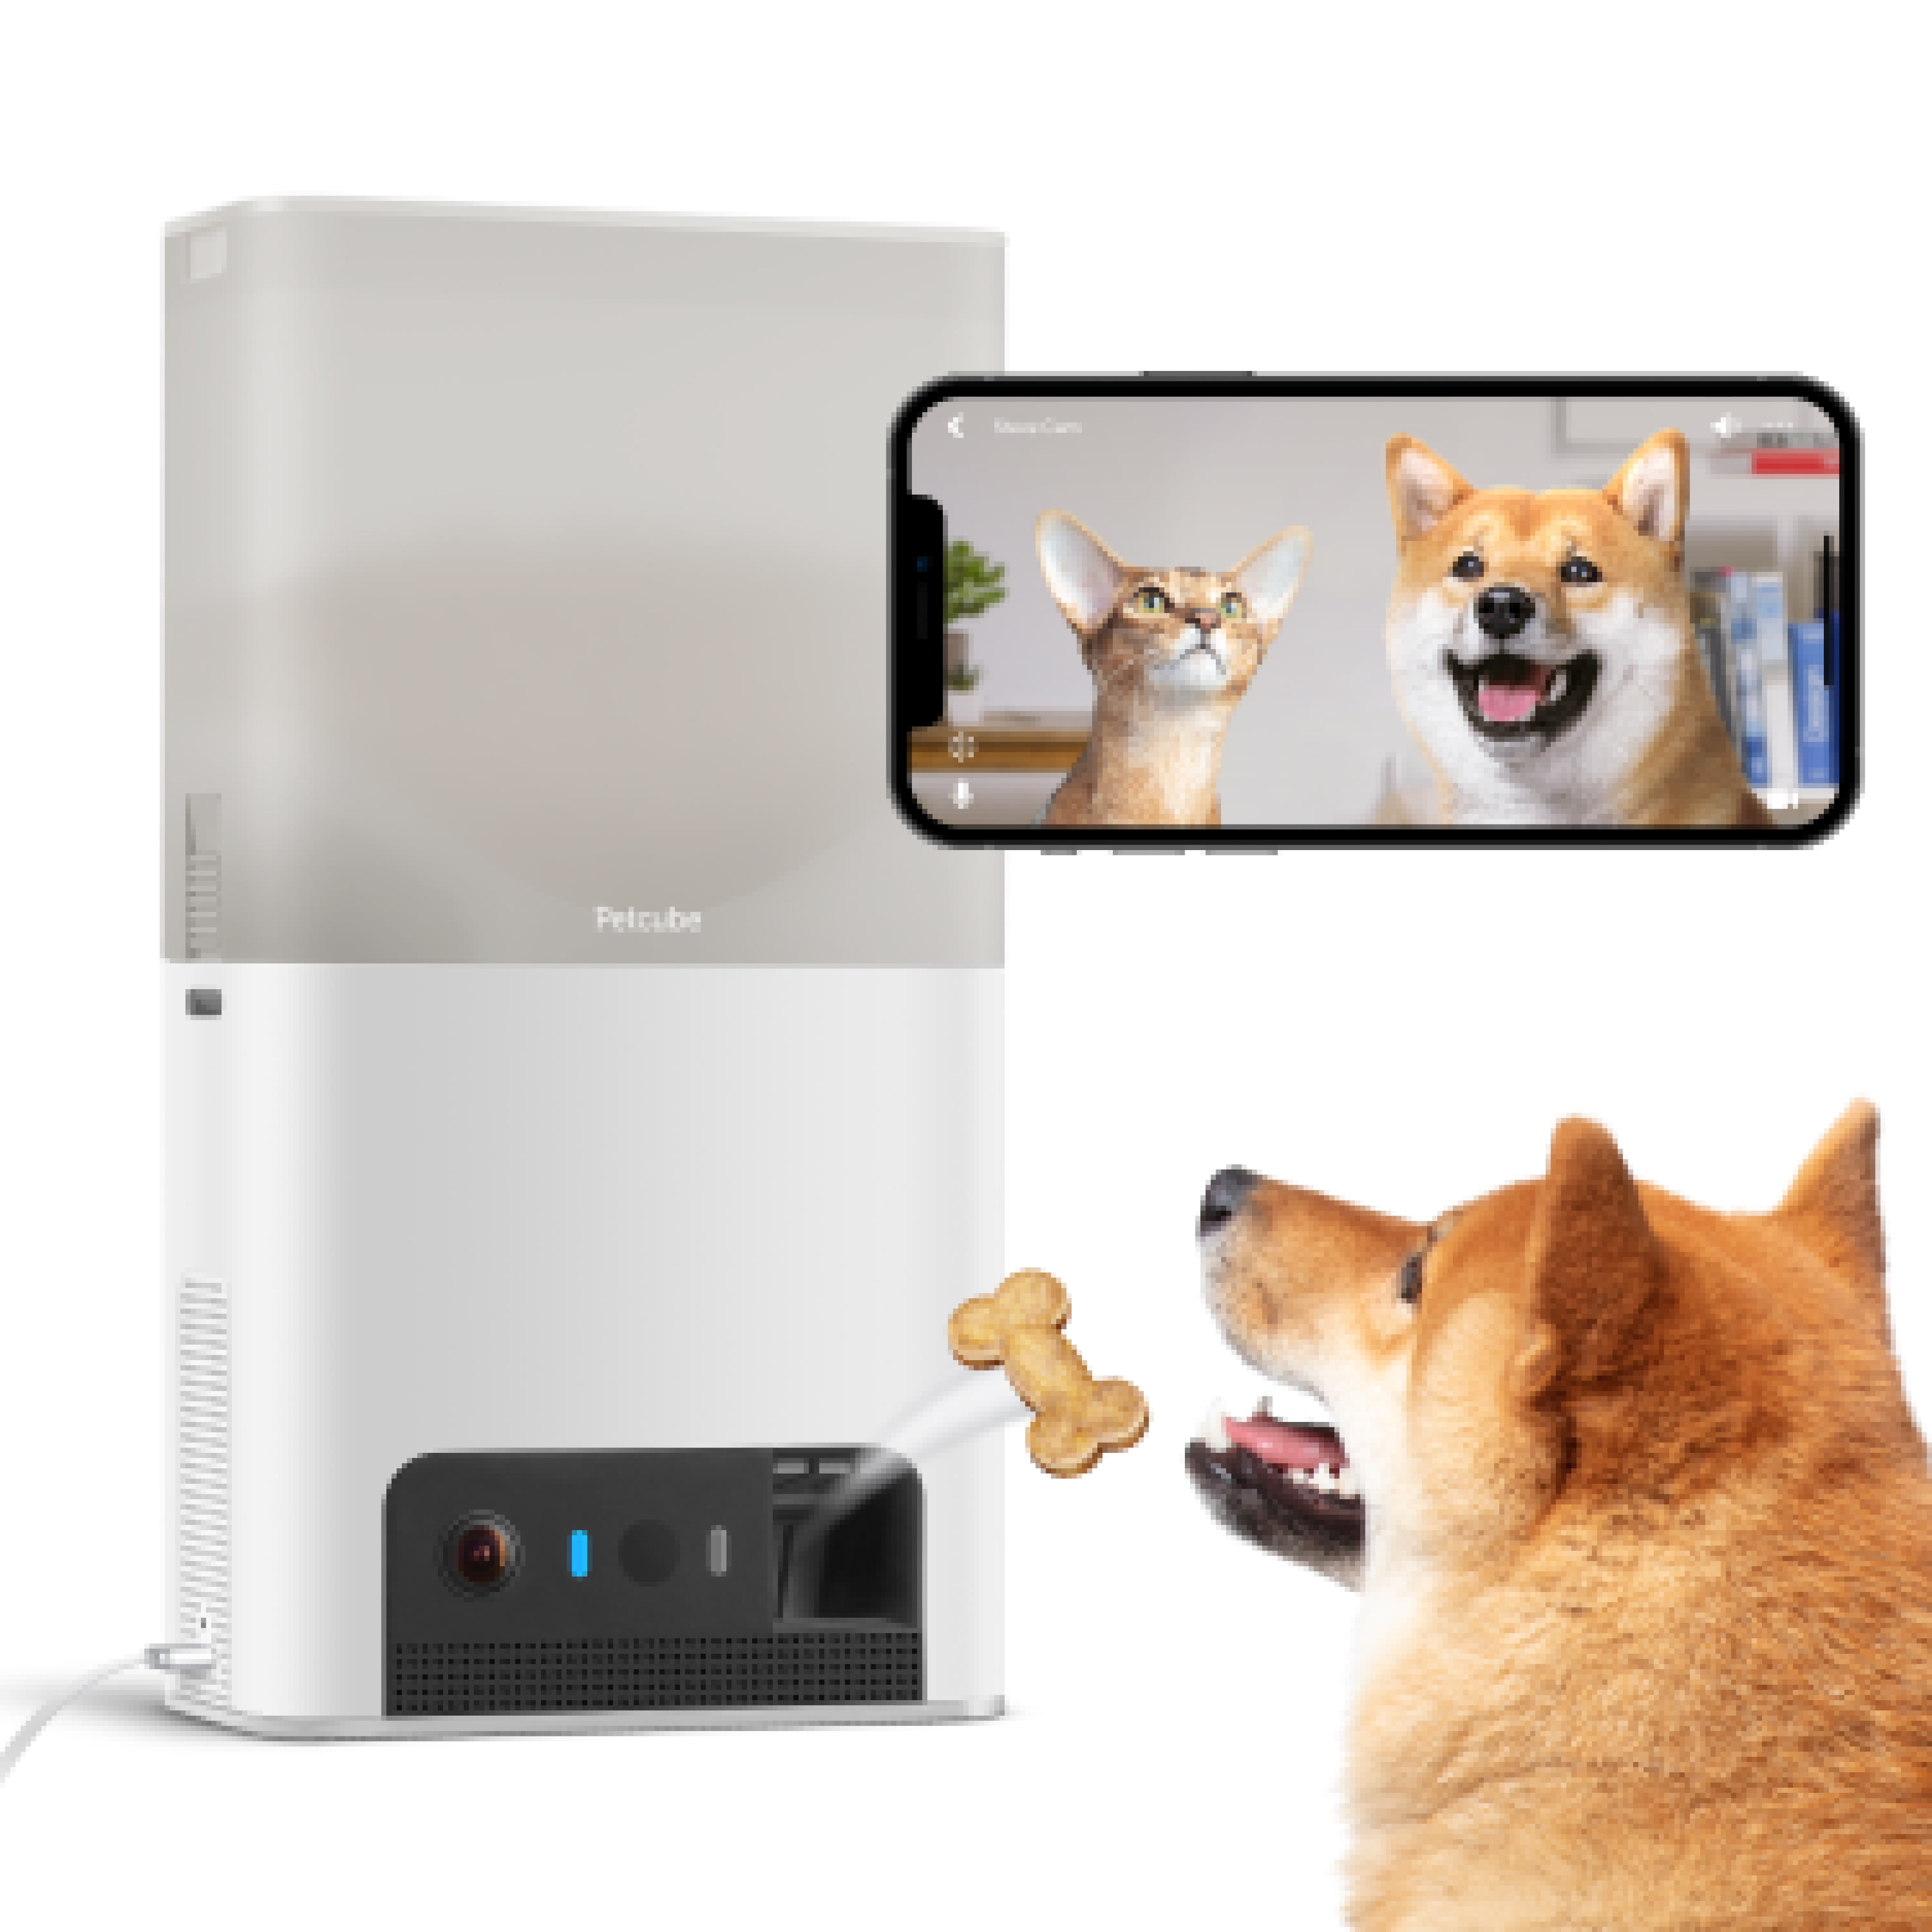 Wopet Interactive Dog Treat Camera and Treat Dispenser Toy WiFi | Guardian